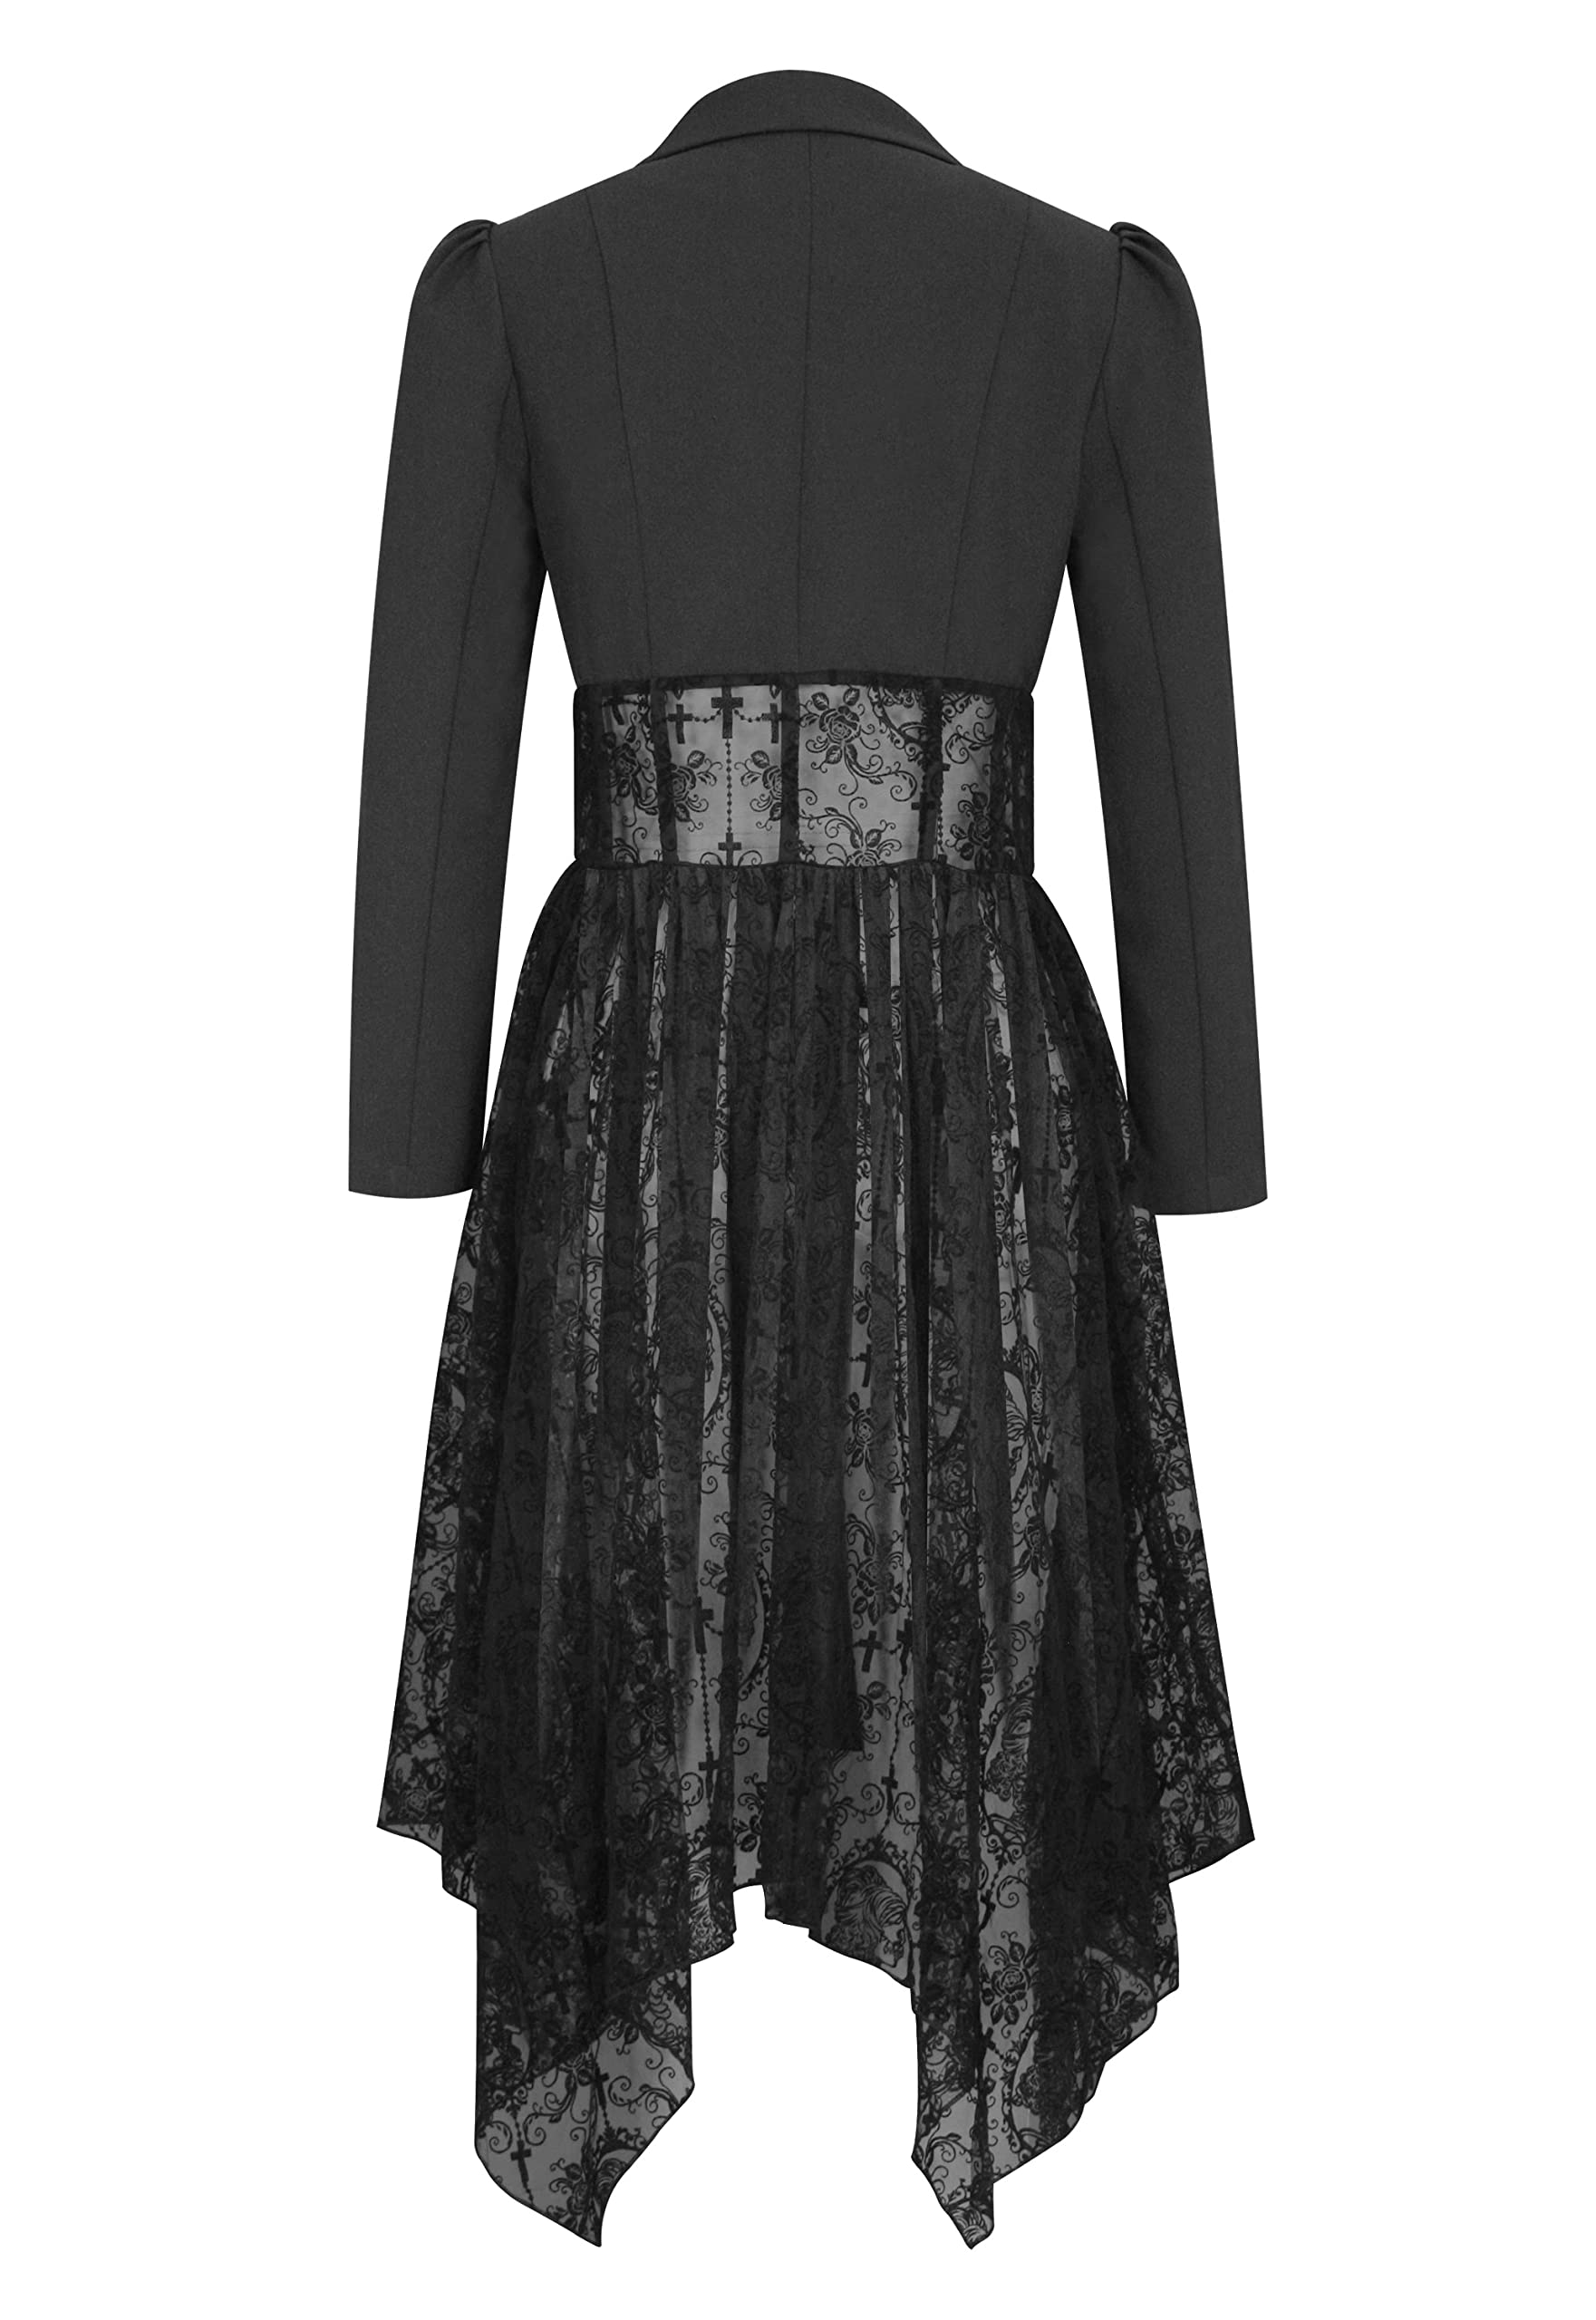 CHIC STAR Womens Lace Gothic Jacket